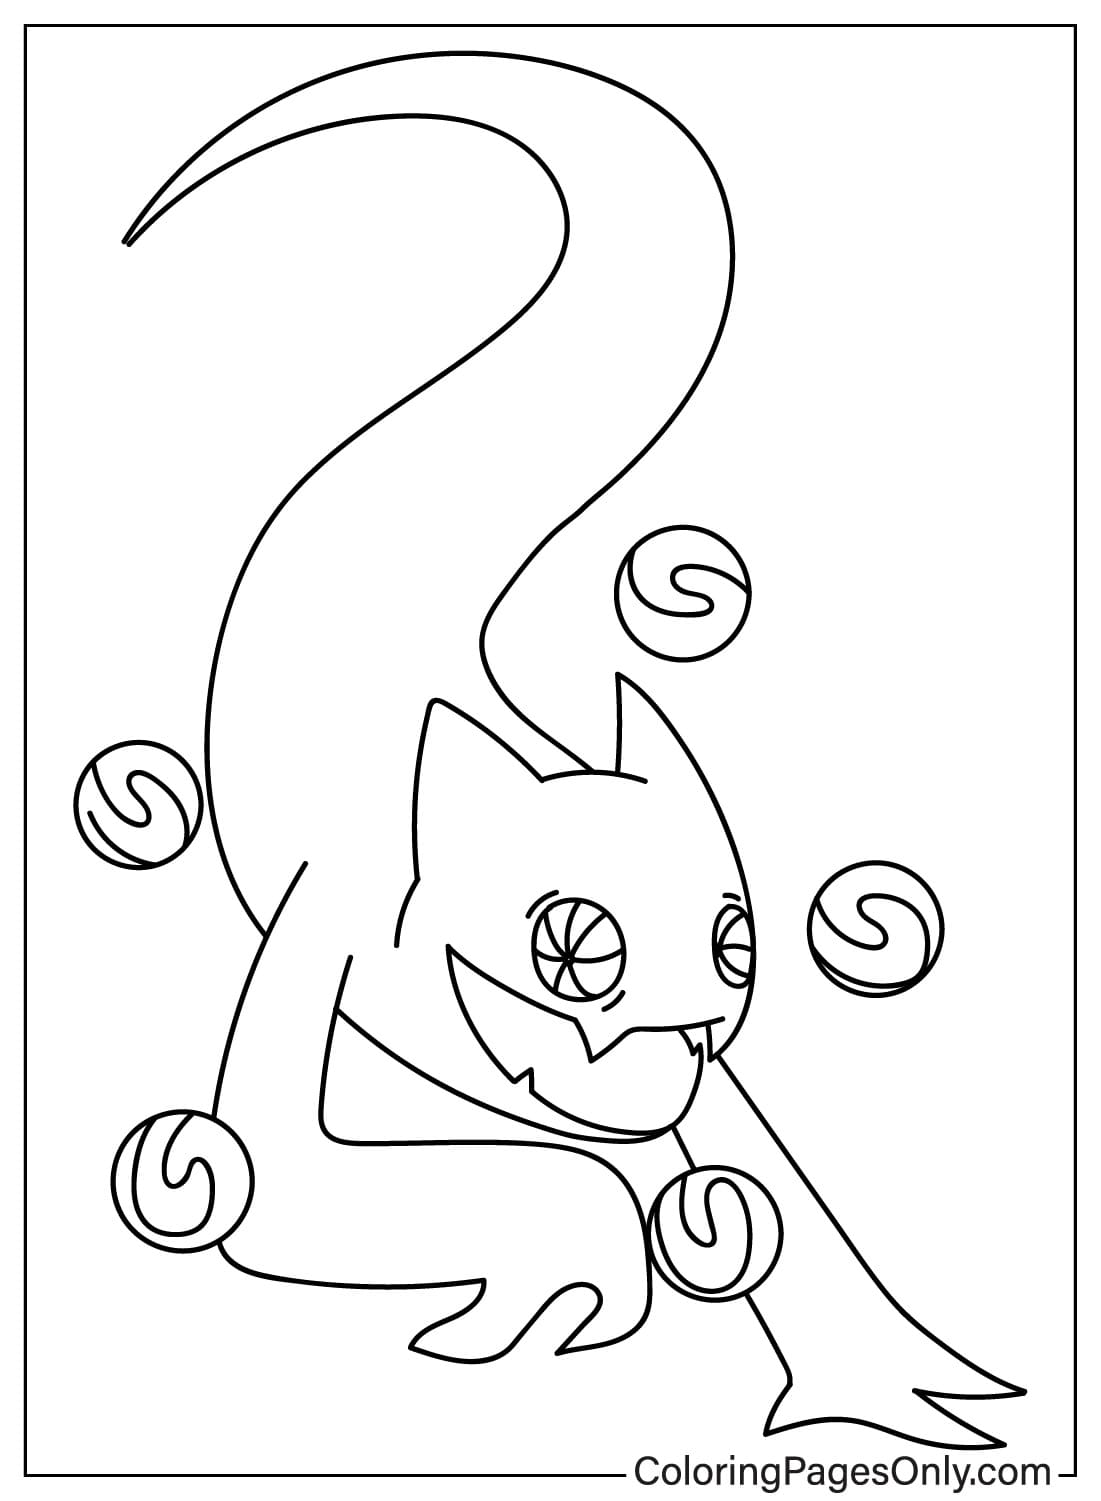 Ghazt Coloring Page from Ghazt